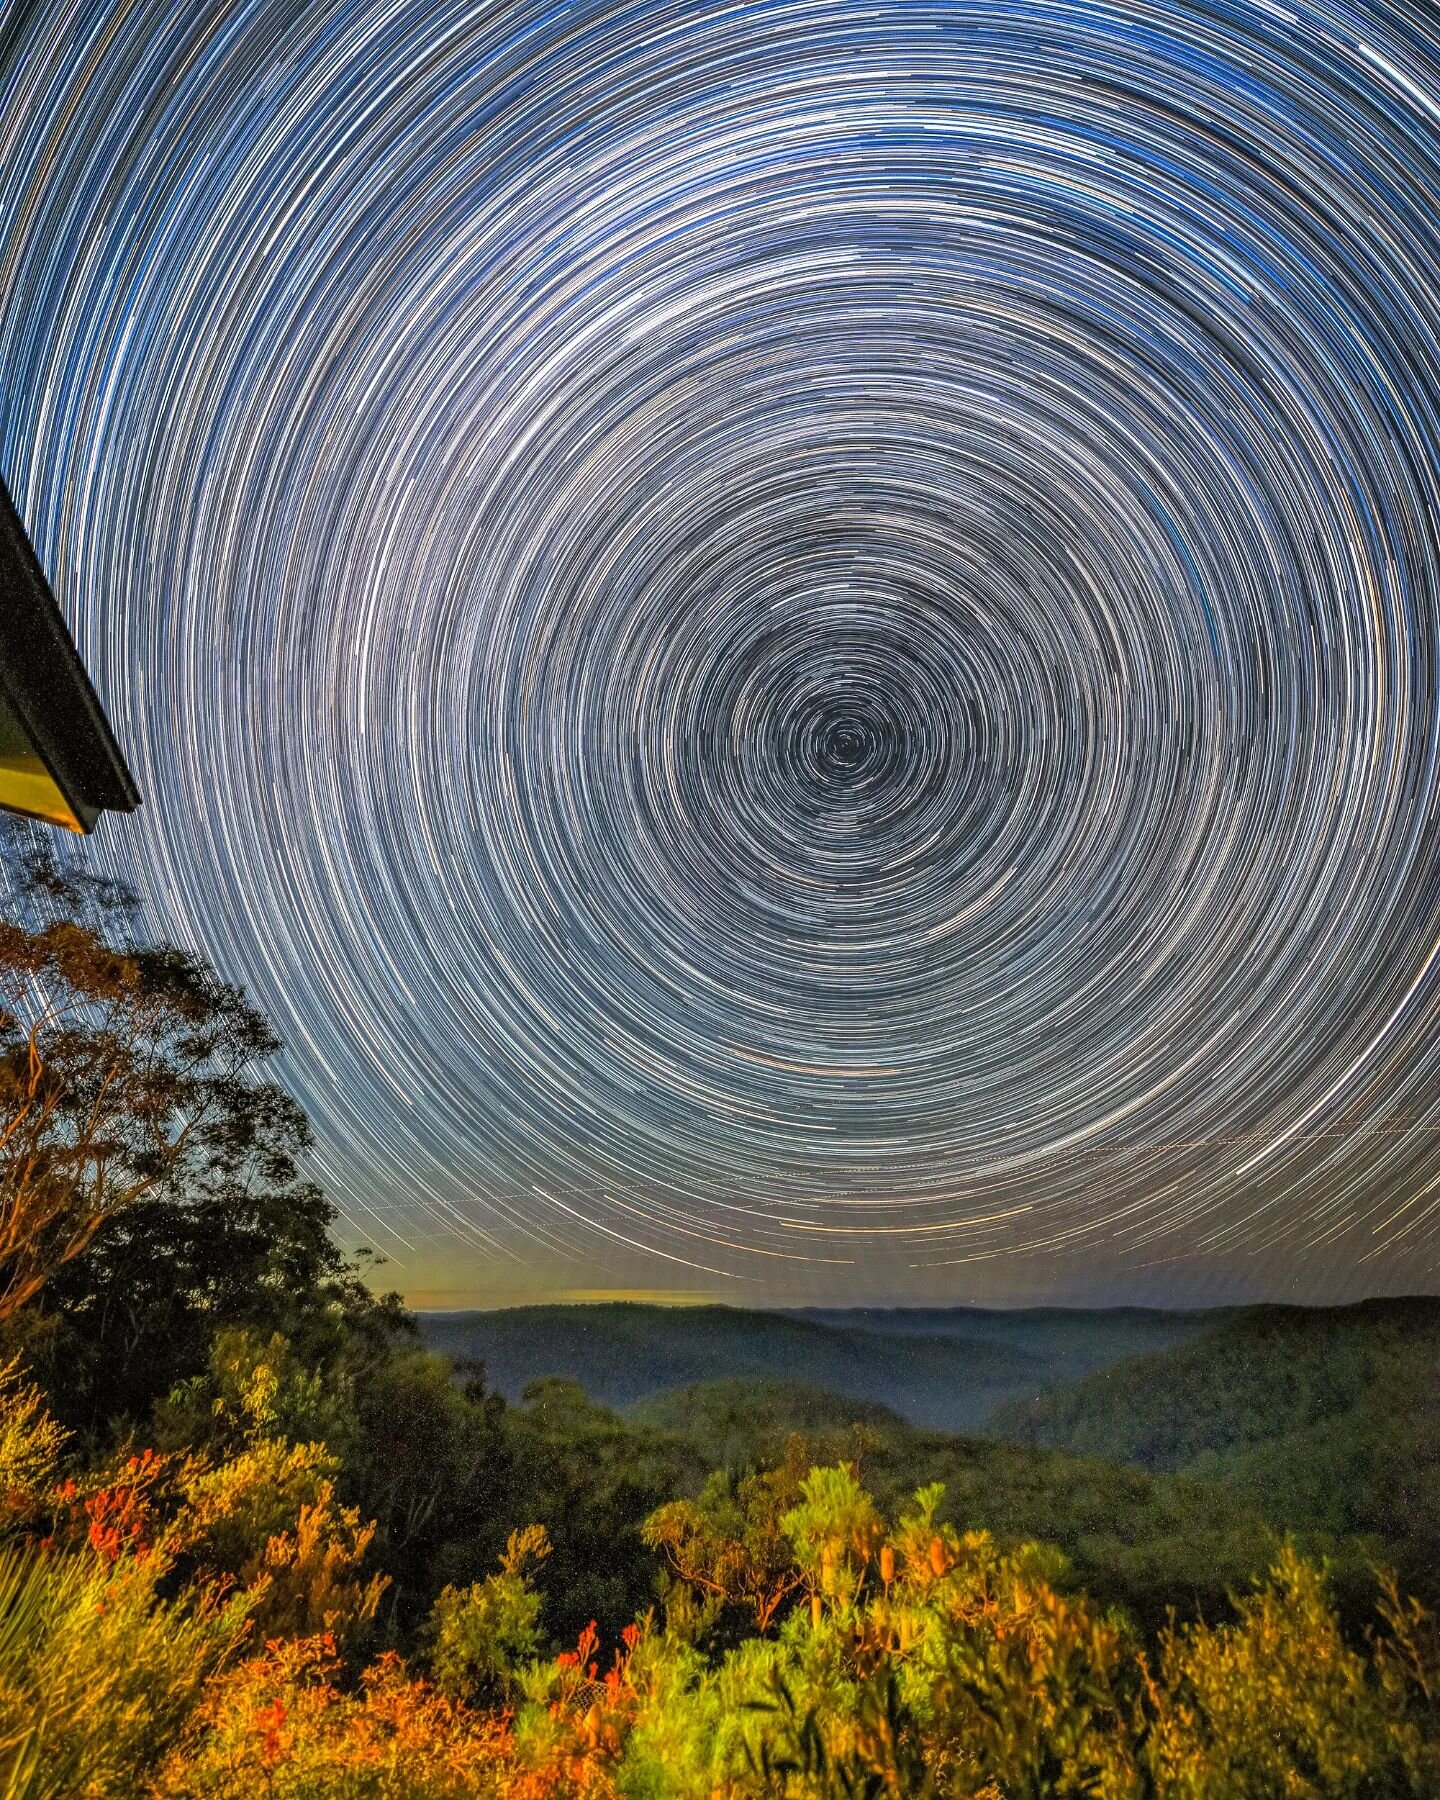 Things we miss while we&rsquo;re asleep: the beautiful night sky with millions of stars here combined with the earth&rsquo;s rotation (in this case around the south celestial pole) over a time period of 2 hours. (400+ photos at 15sec each stacked in 